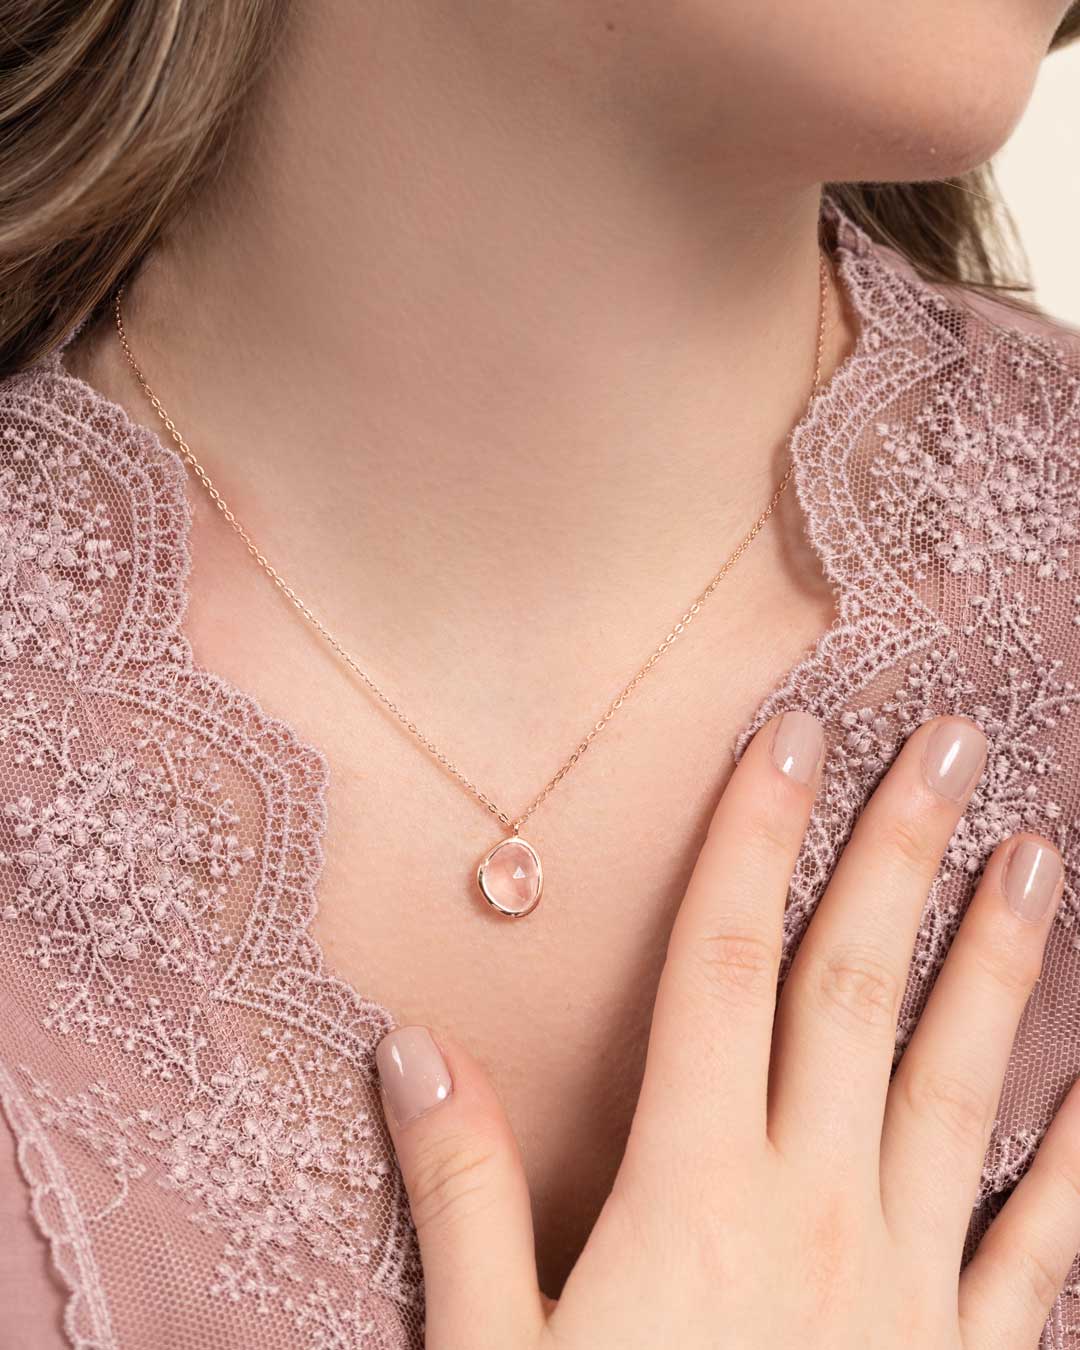 UNEVEN ROSE QUARTZ NECKLACE SET IN 925 SILVER ROSE GOLD PLATED